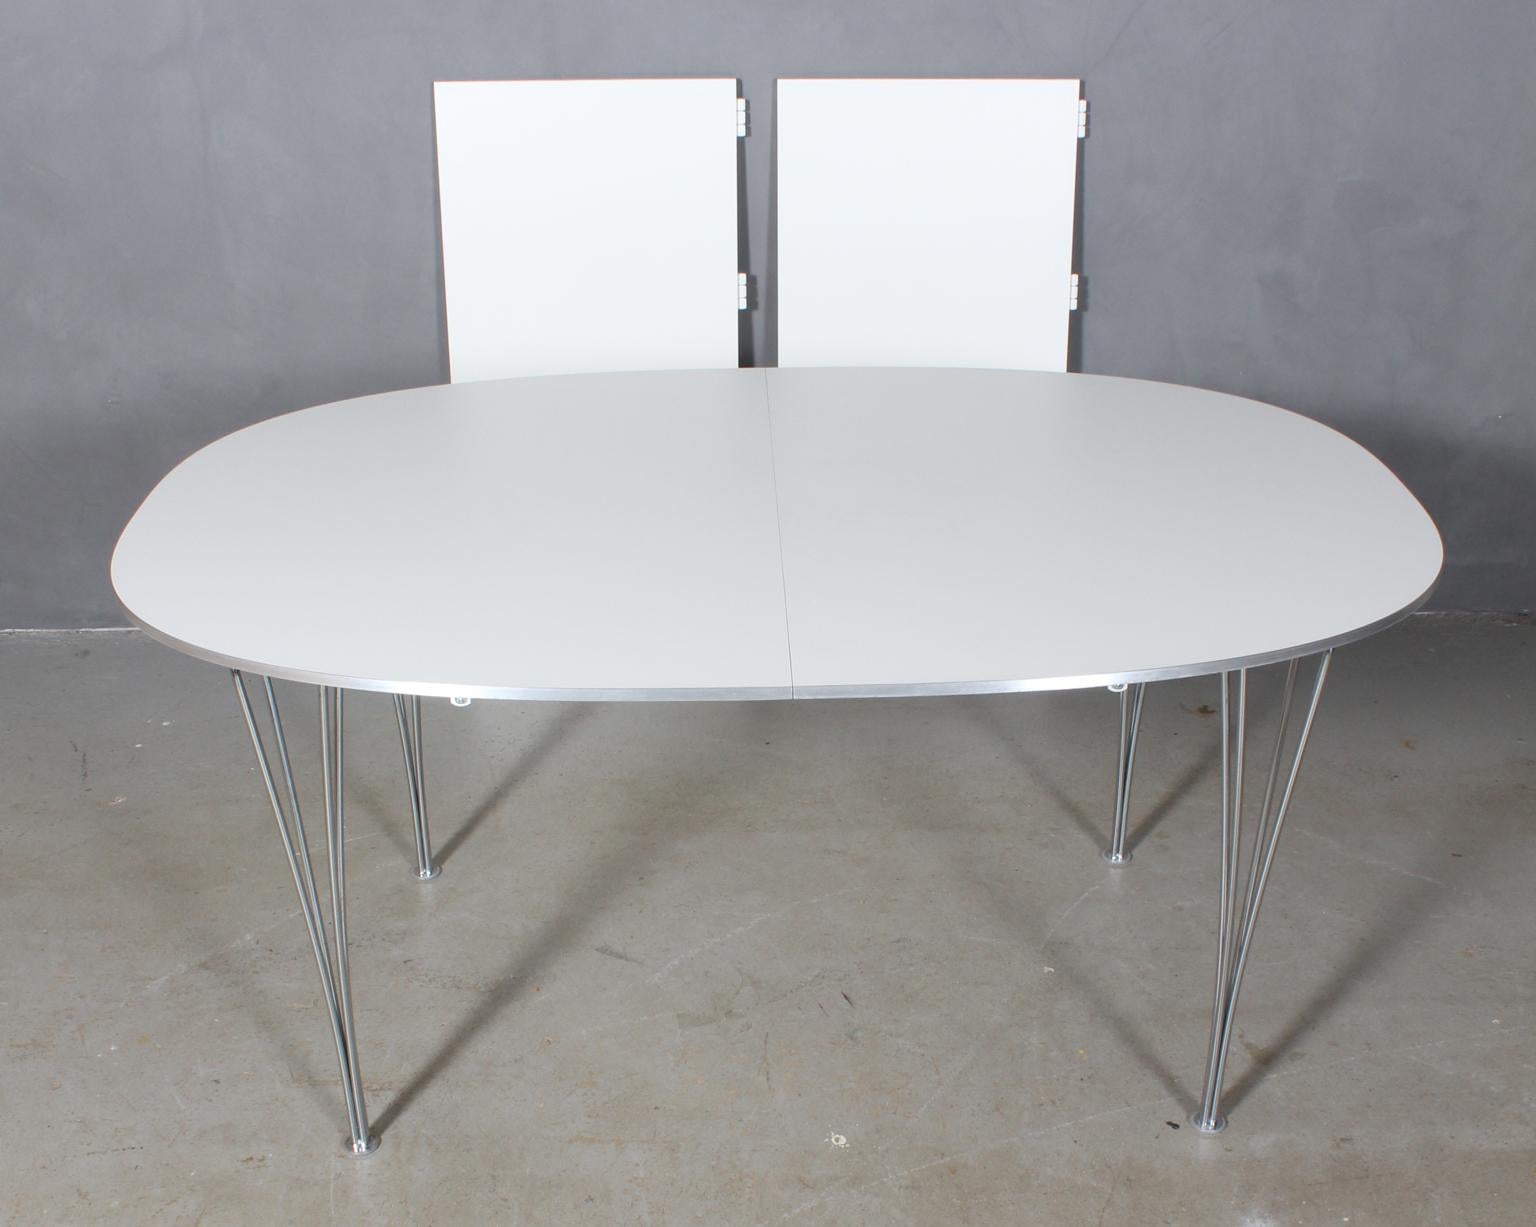 Piet Hein & Bruno Mathsson dining table with original white laminate.

Alu side list.

Two extension leaf of 50 cms.

Legs of chromed metal.

Model Super Elipse, made by Fritz Hansen.

This is one of the most iconic tables in Scandinavia.